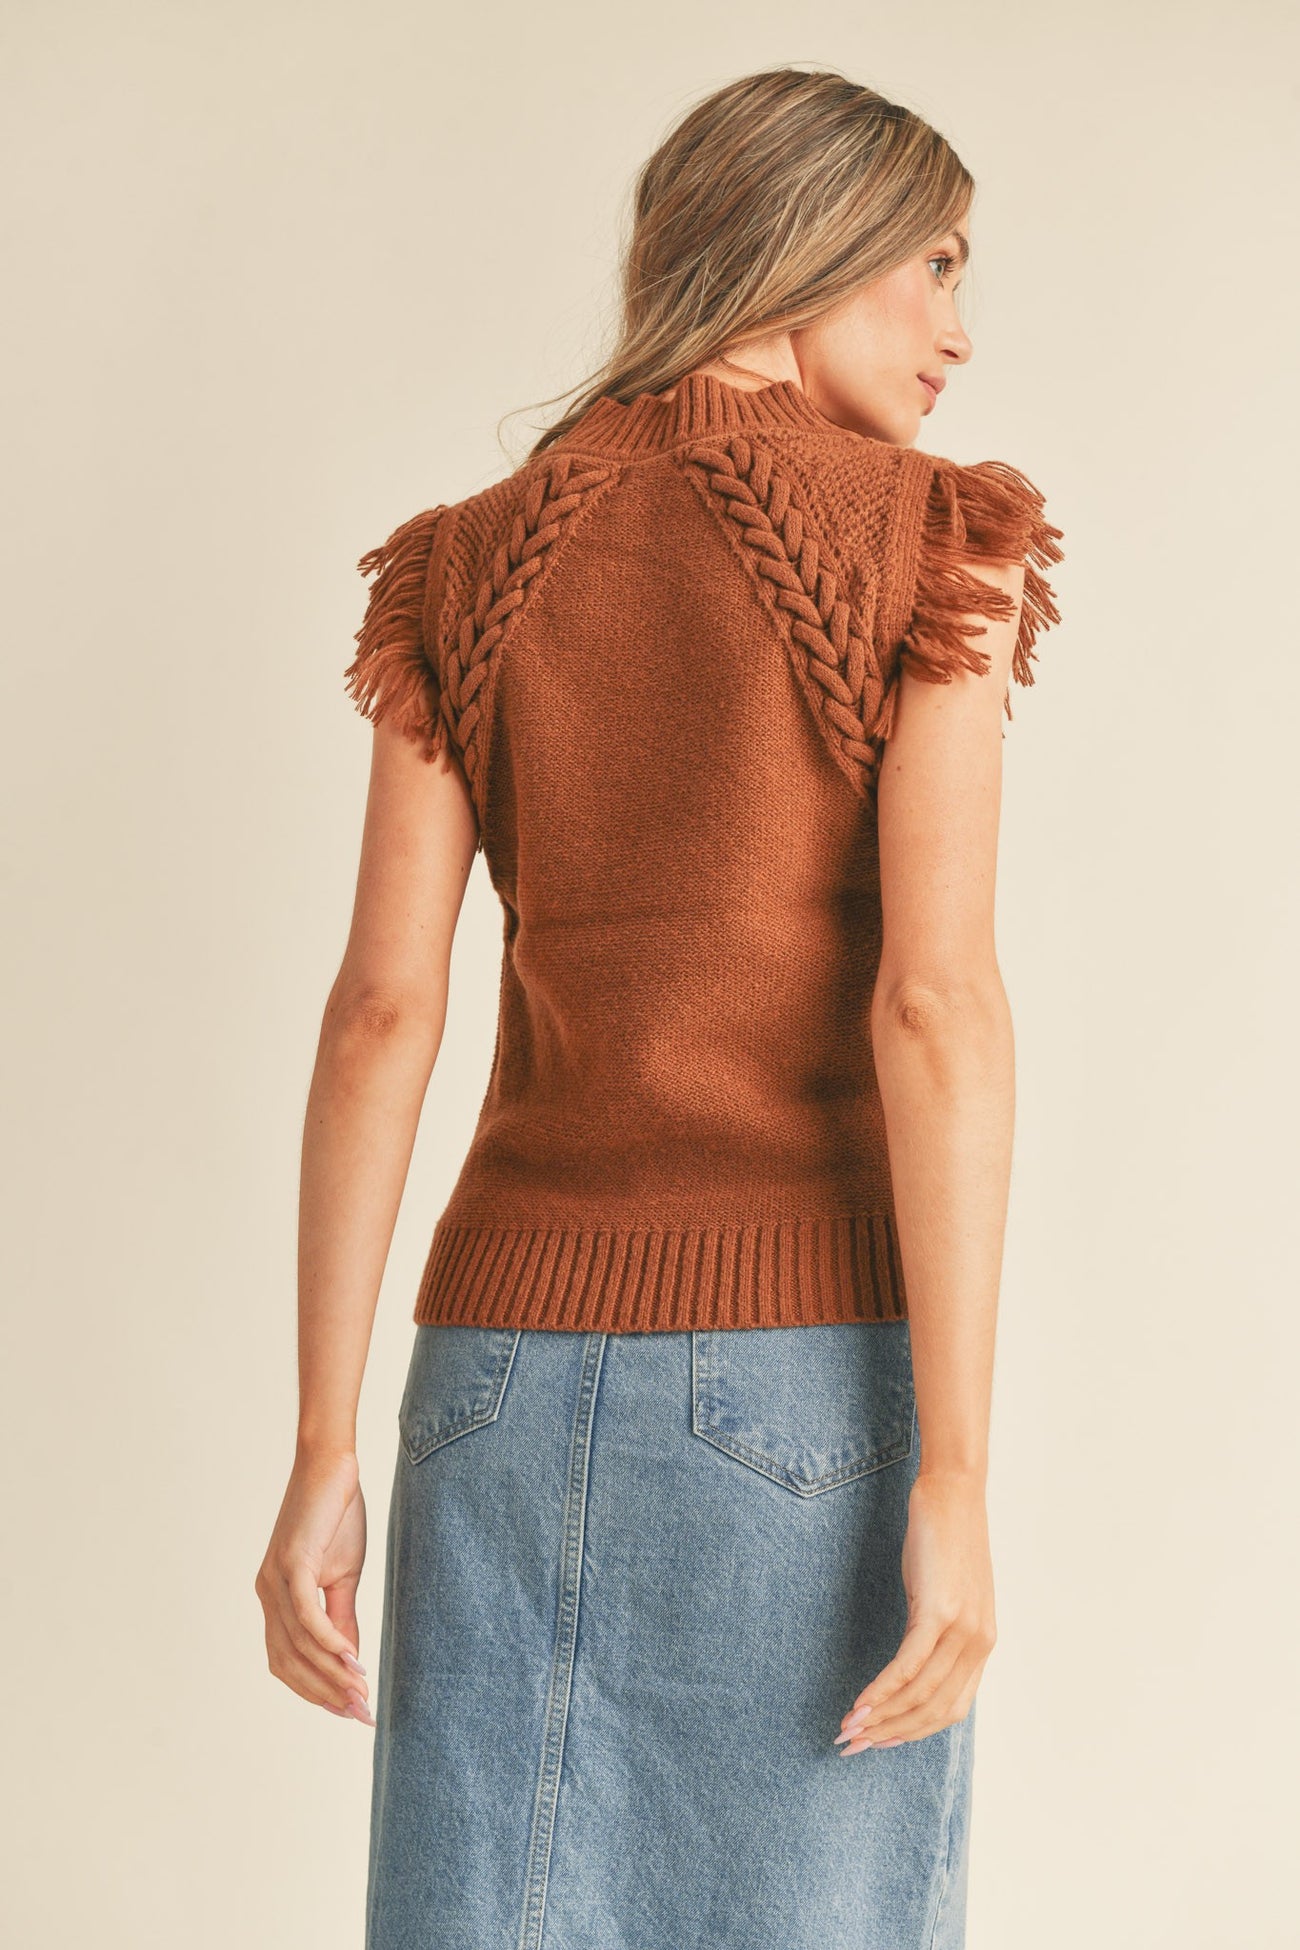 Taupe Cable Knit Sweater Vest With Fringe– PinkBlush